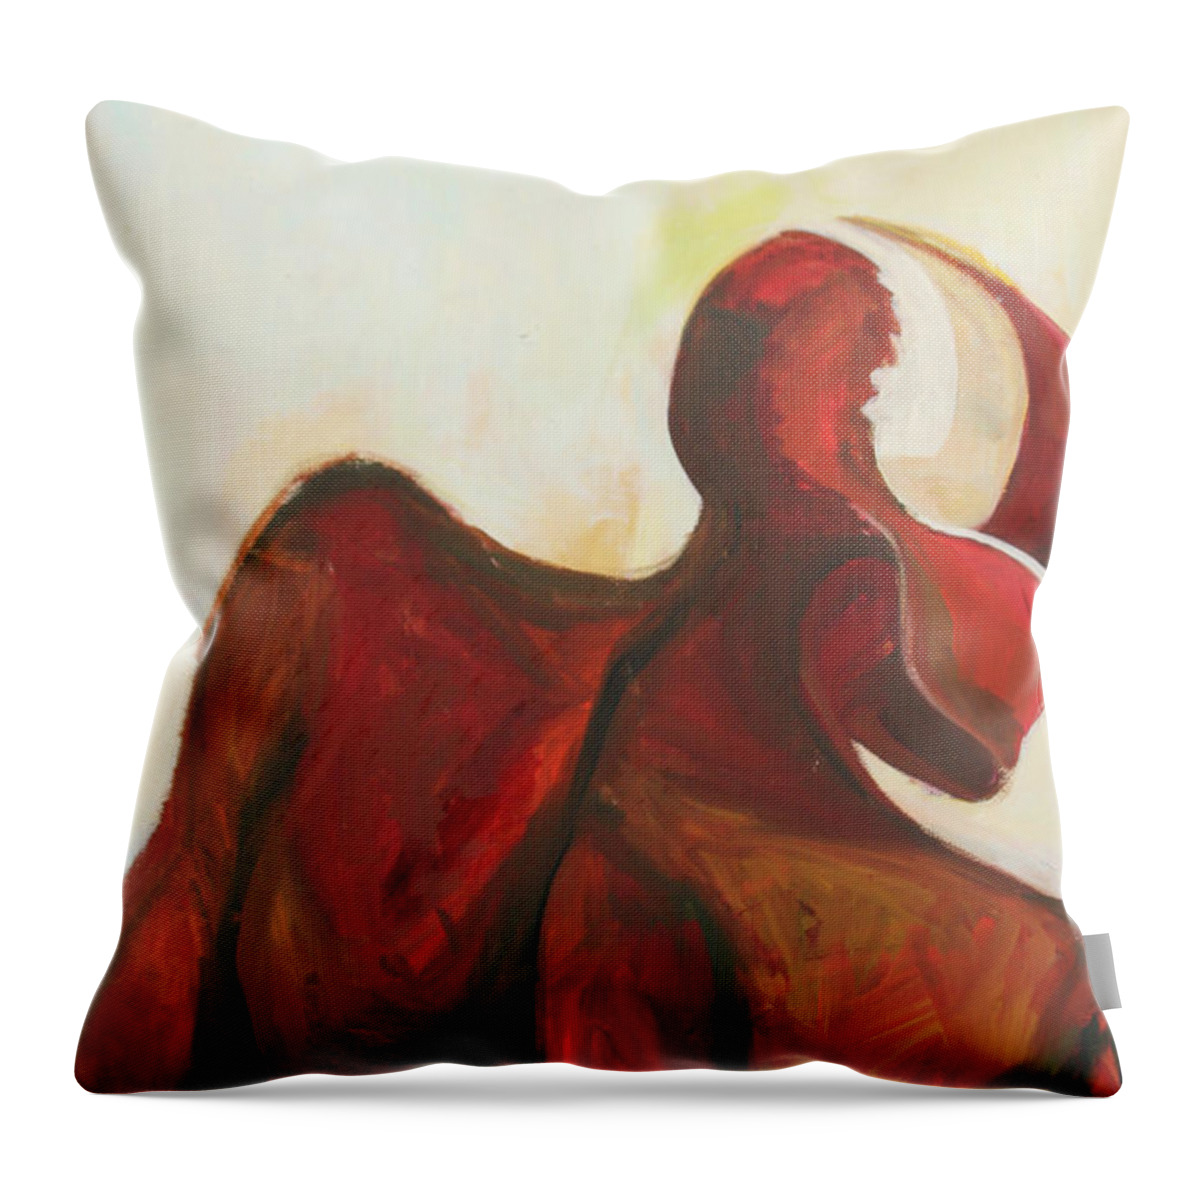 Oil Painting Throw Pillow featuring the painting Division by Daun Soden-Greene